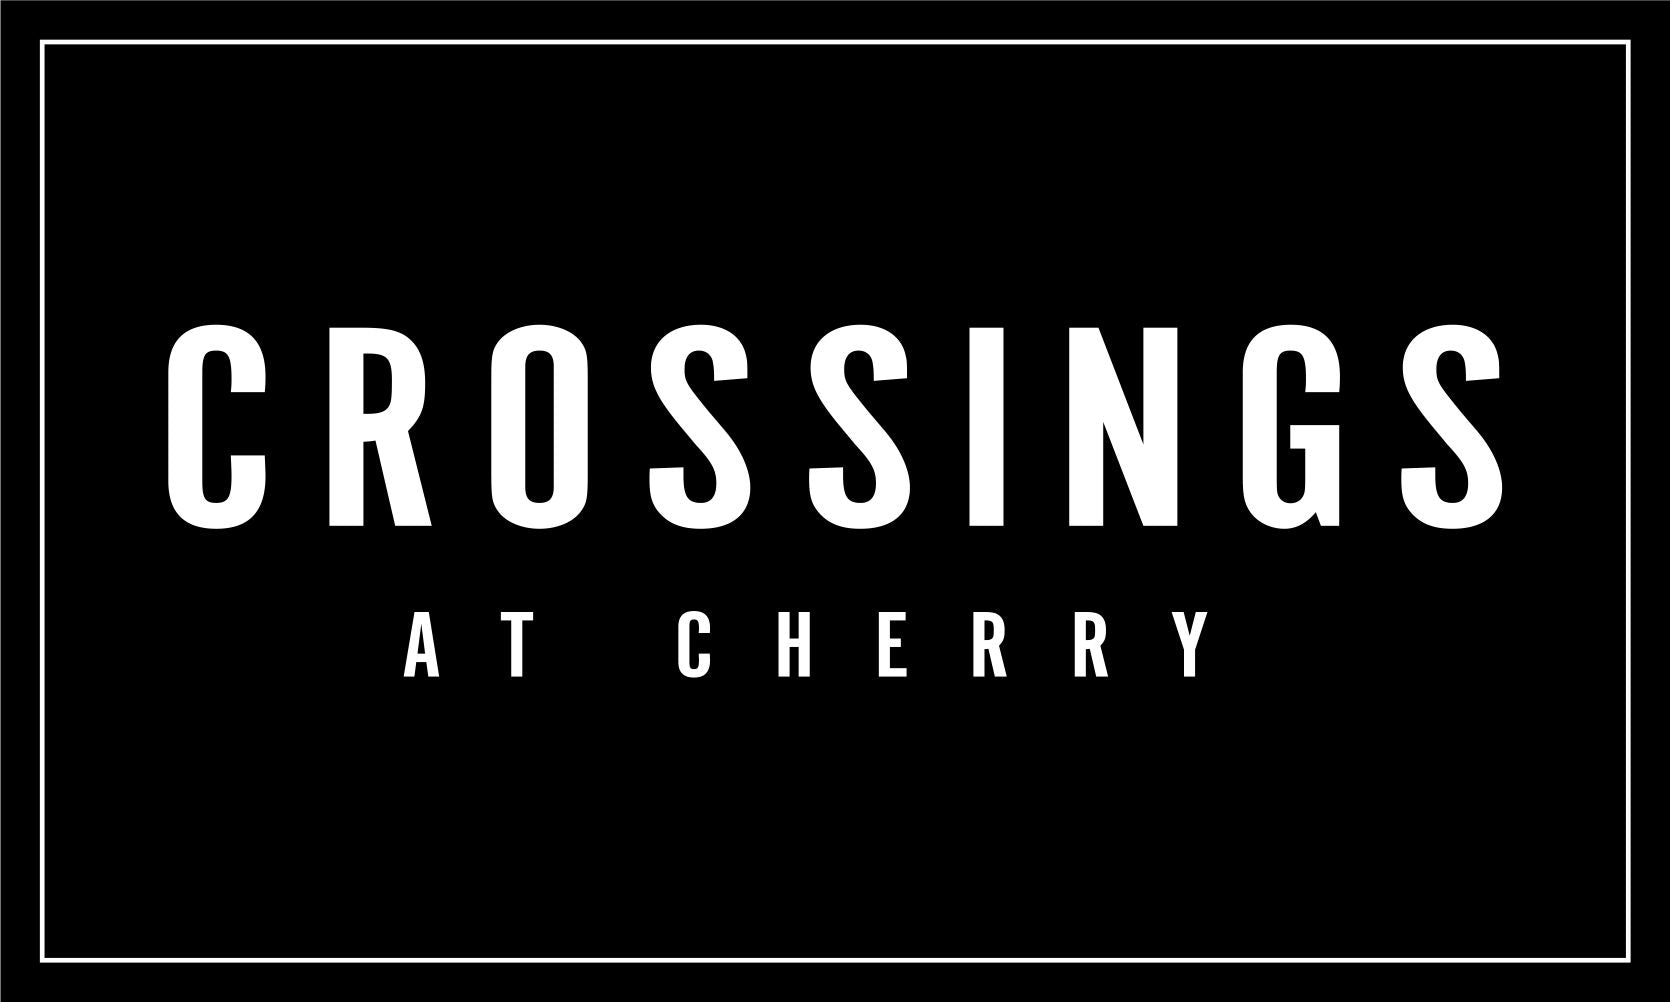 Crossings at Cherry 3 X 5 Luxury Berber Inlay - The Personalized Doormats Company